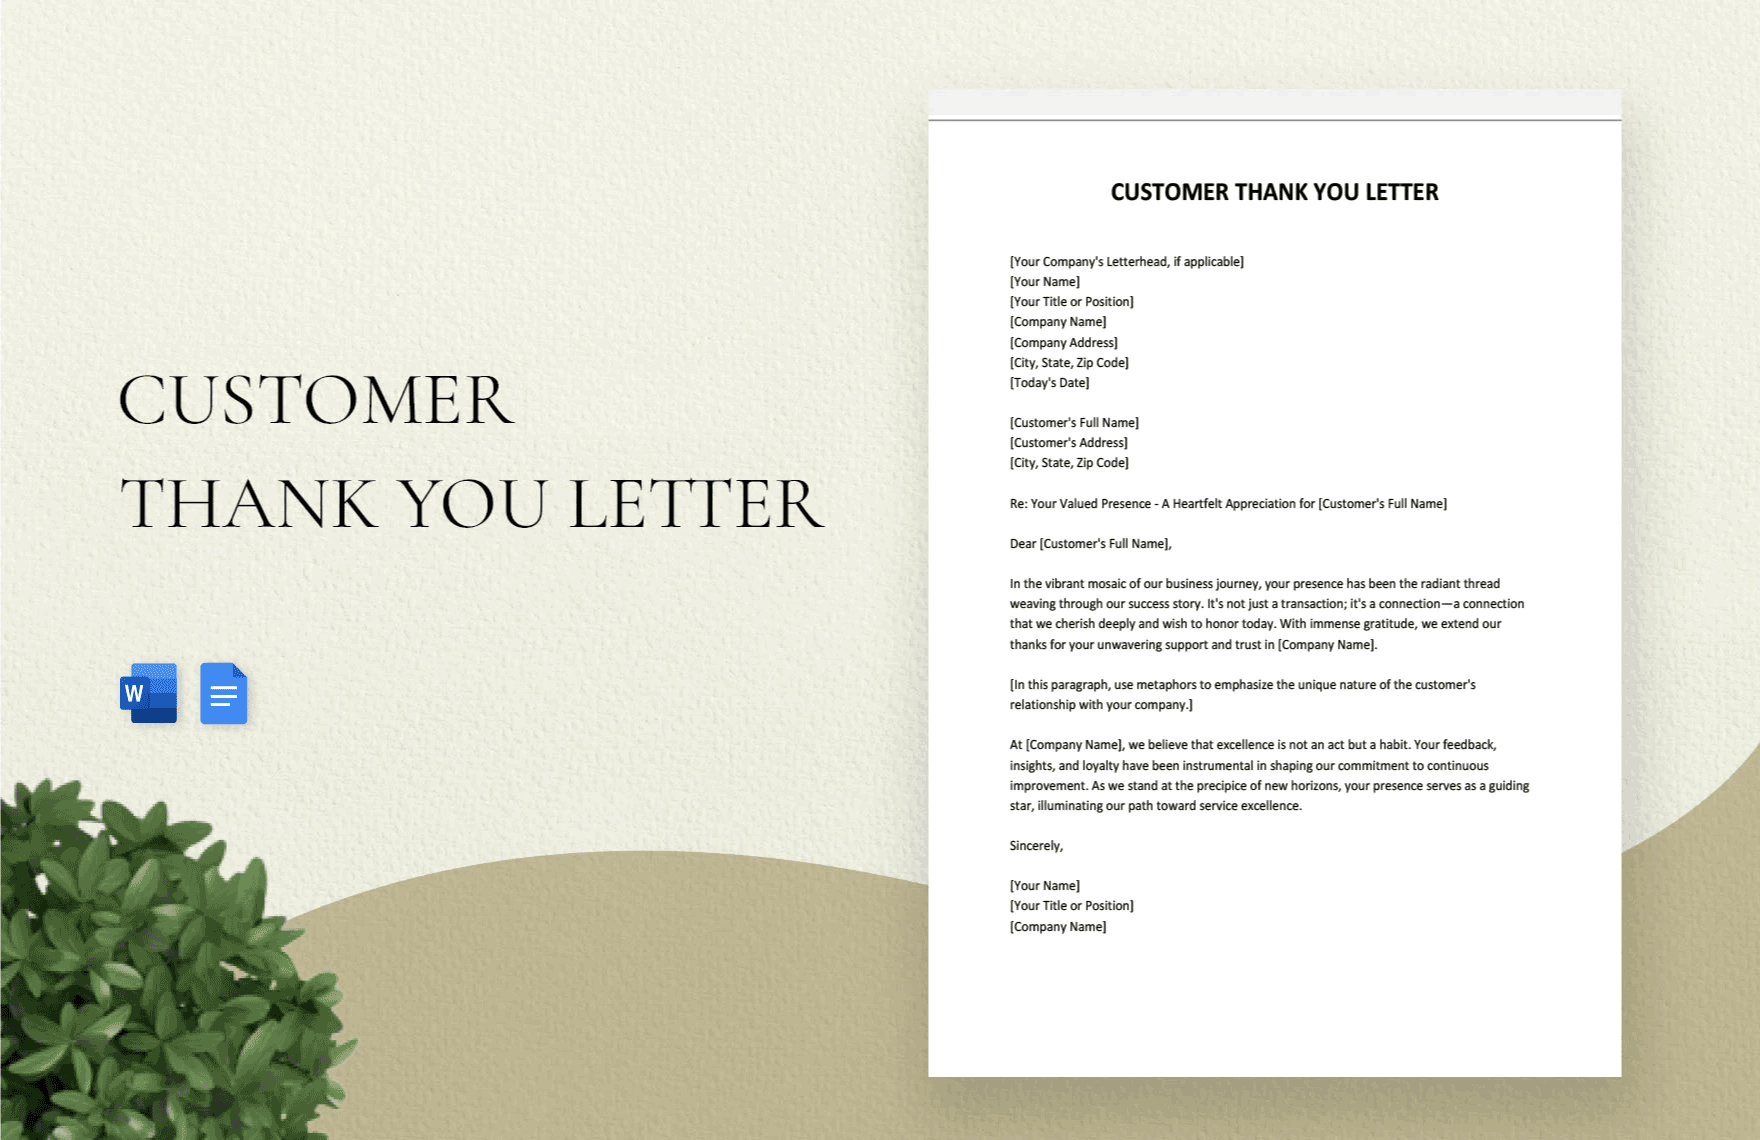 Customer Thank You Letter in Word, Google Docs